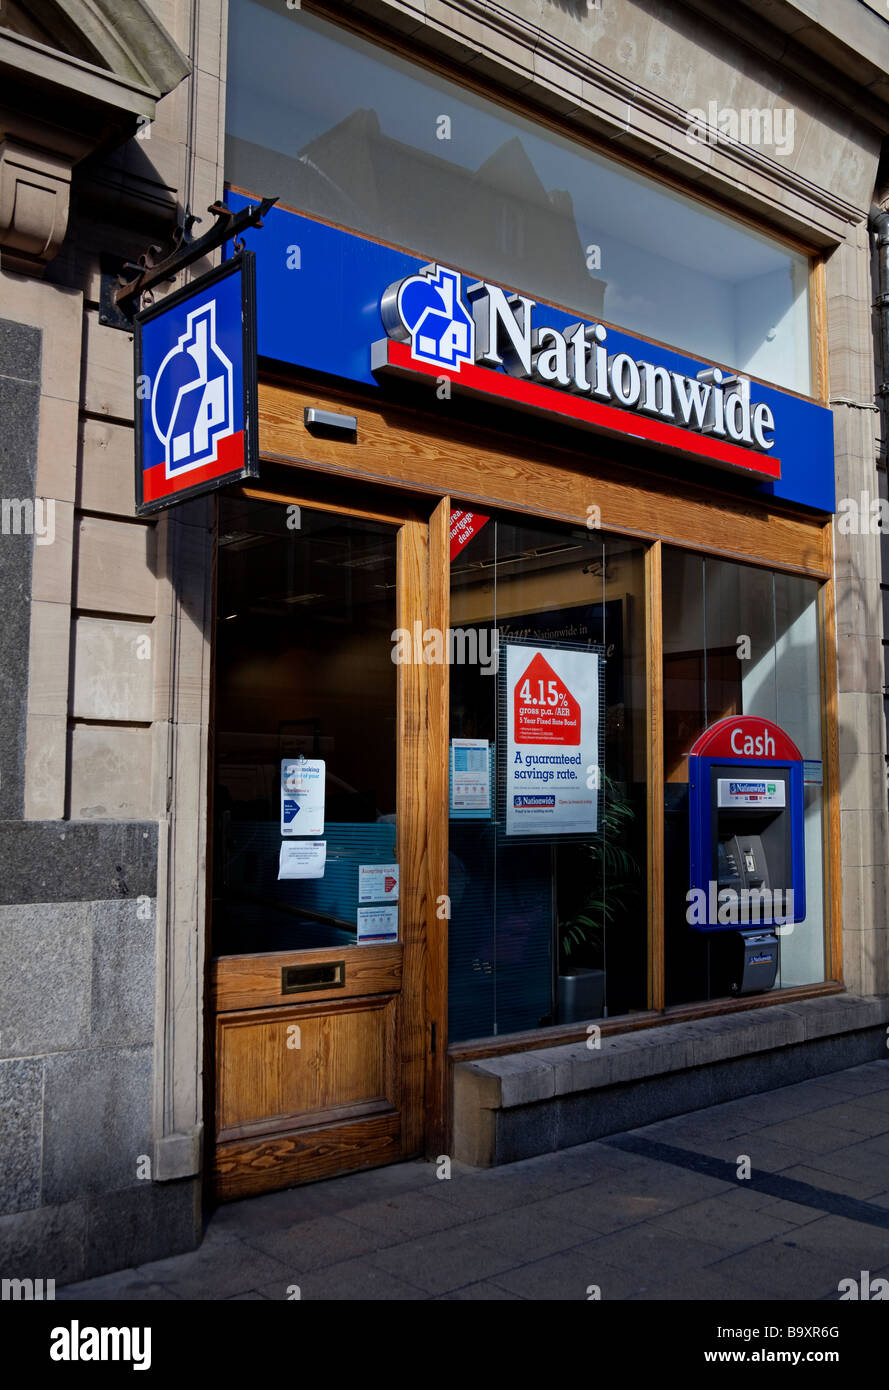 Nationwide Building Society, Dunfermline, Fife, Scotland, UK, Europe Banque D'Images